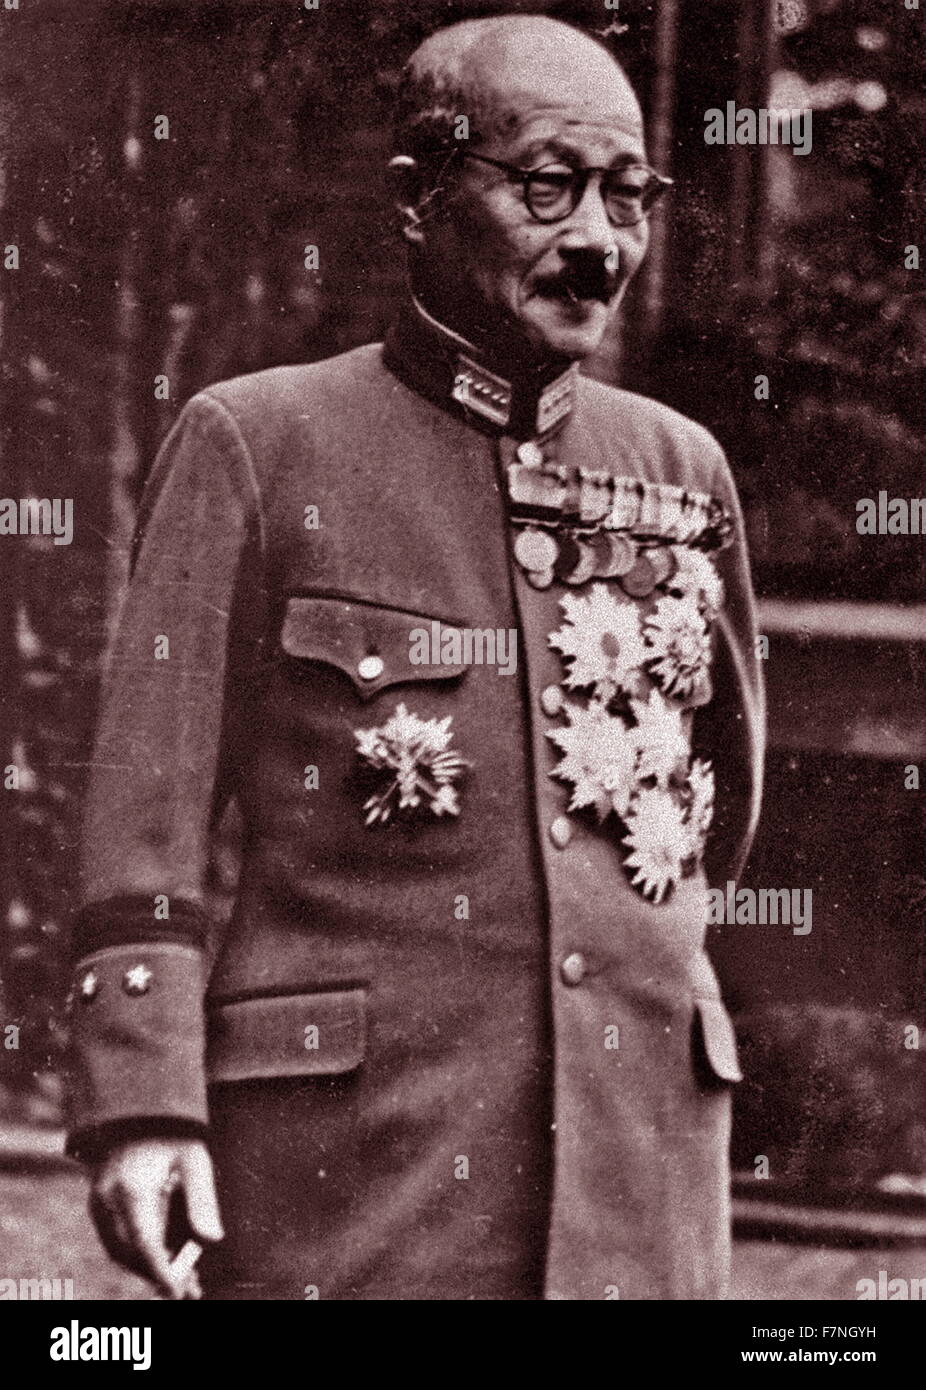 Photograph of Tojo Hideki Tojo Hideki (1884-1948) general of the Imperial Japanese Army (IJA), the leader of the Imperial Rule Assistance Association, and the 40th Prime Minister of Japan during much of World War II. Dated 1944 Stock Photo